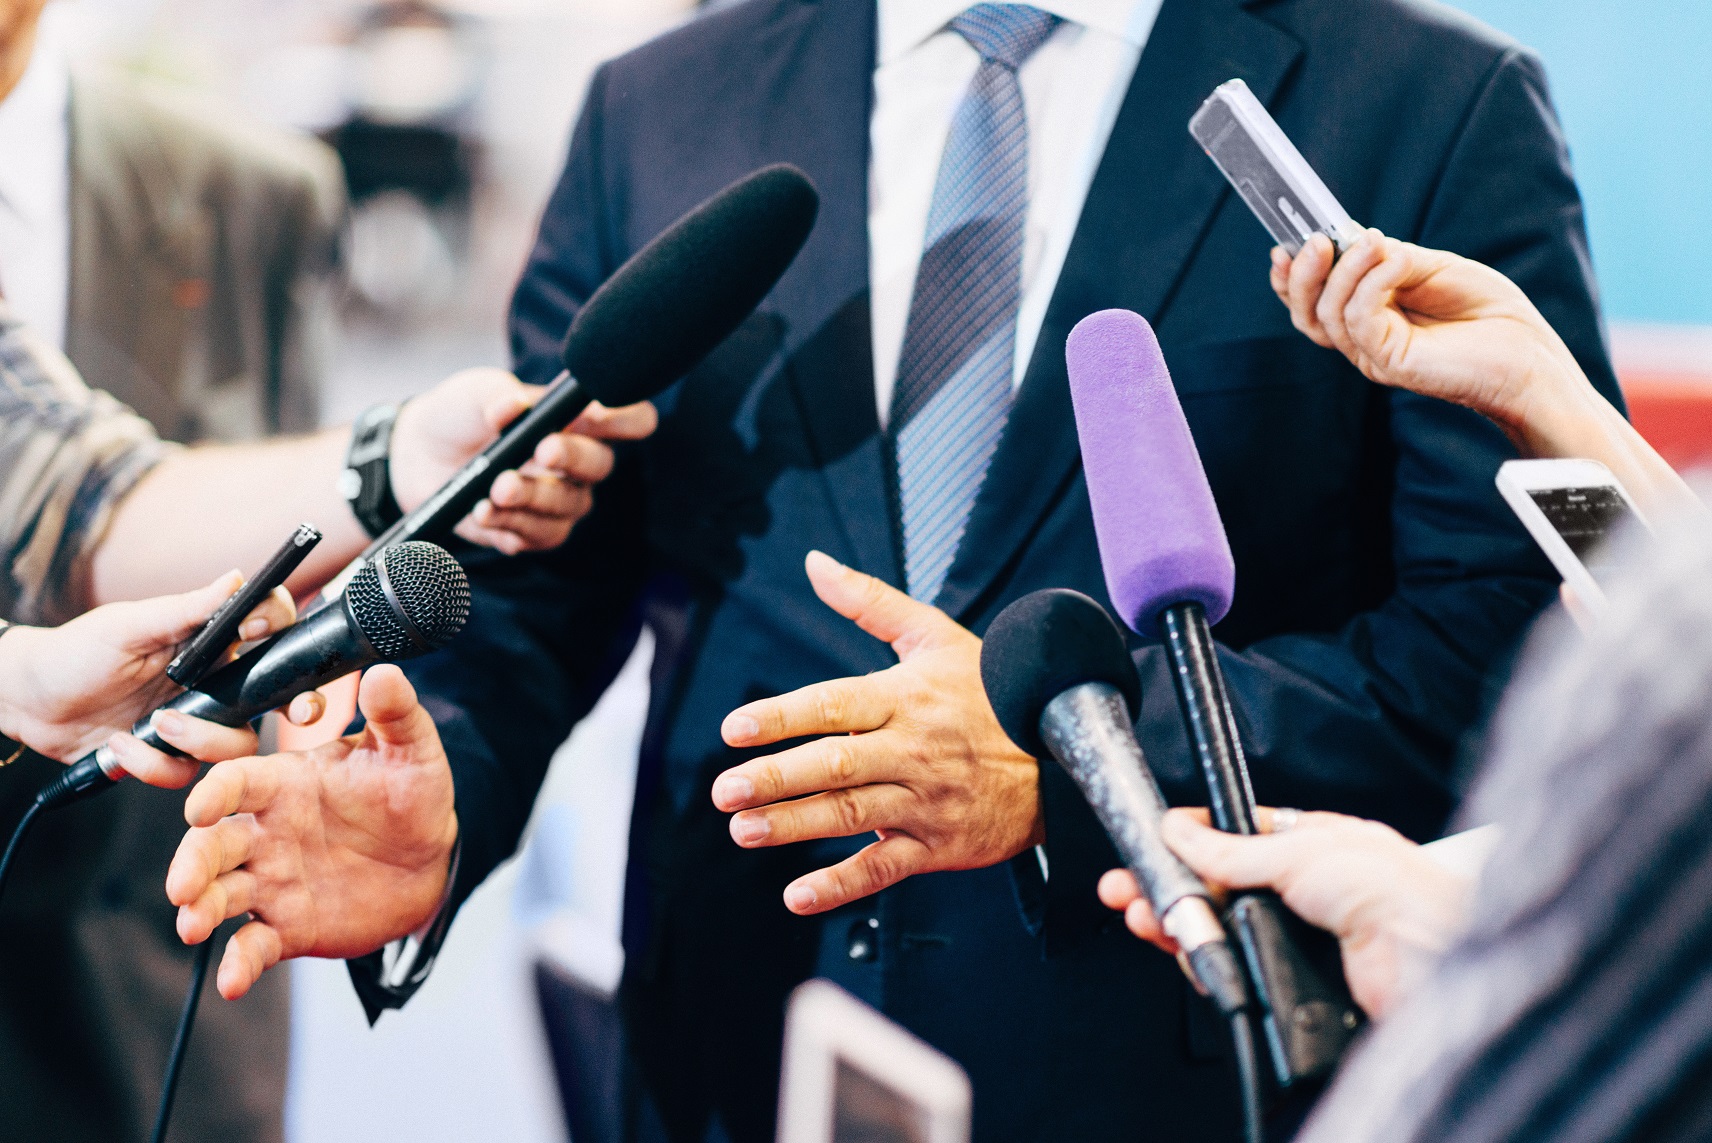 How to prepare for a media interview